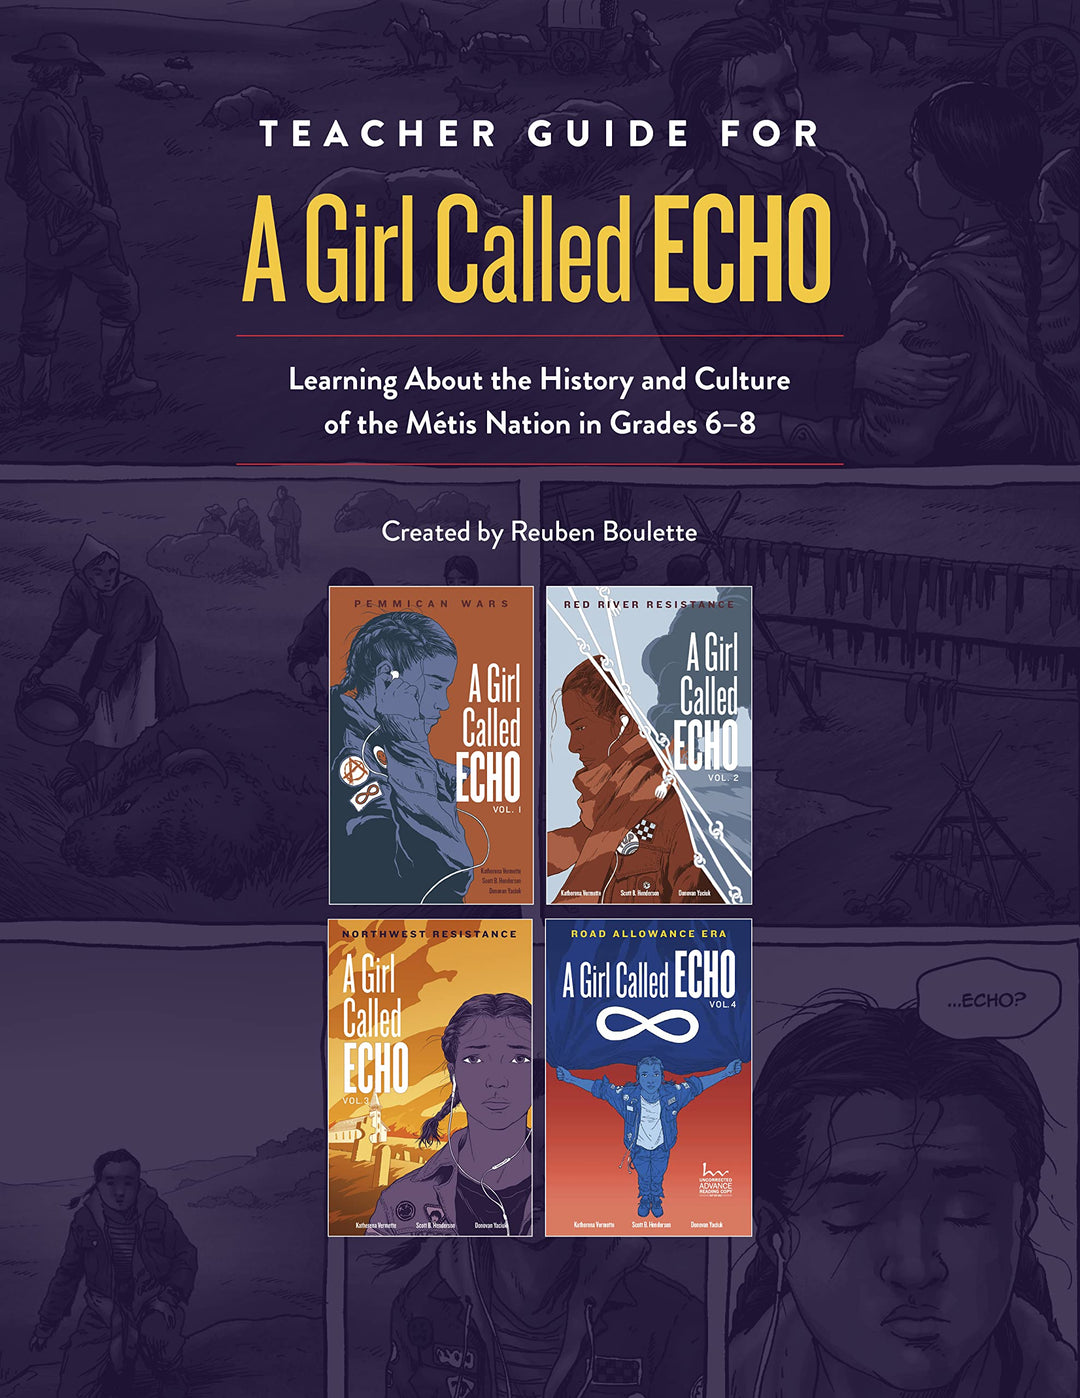 Teacher Guide for a Girl Called Echo: Learning about the History and Culture of the Métis Nation in Grades 6-8 by Reuben Boulette